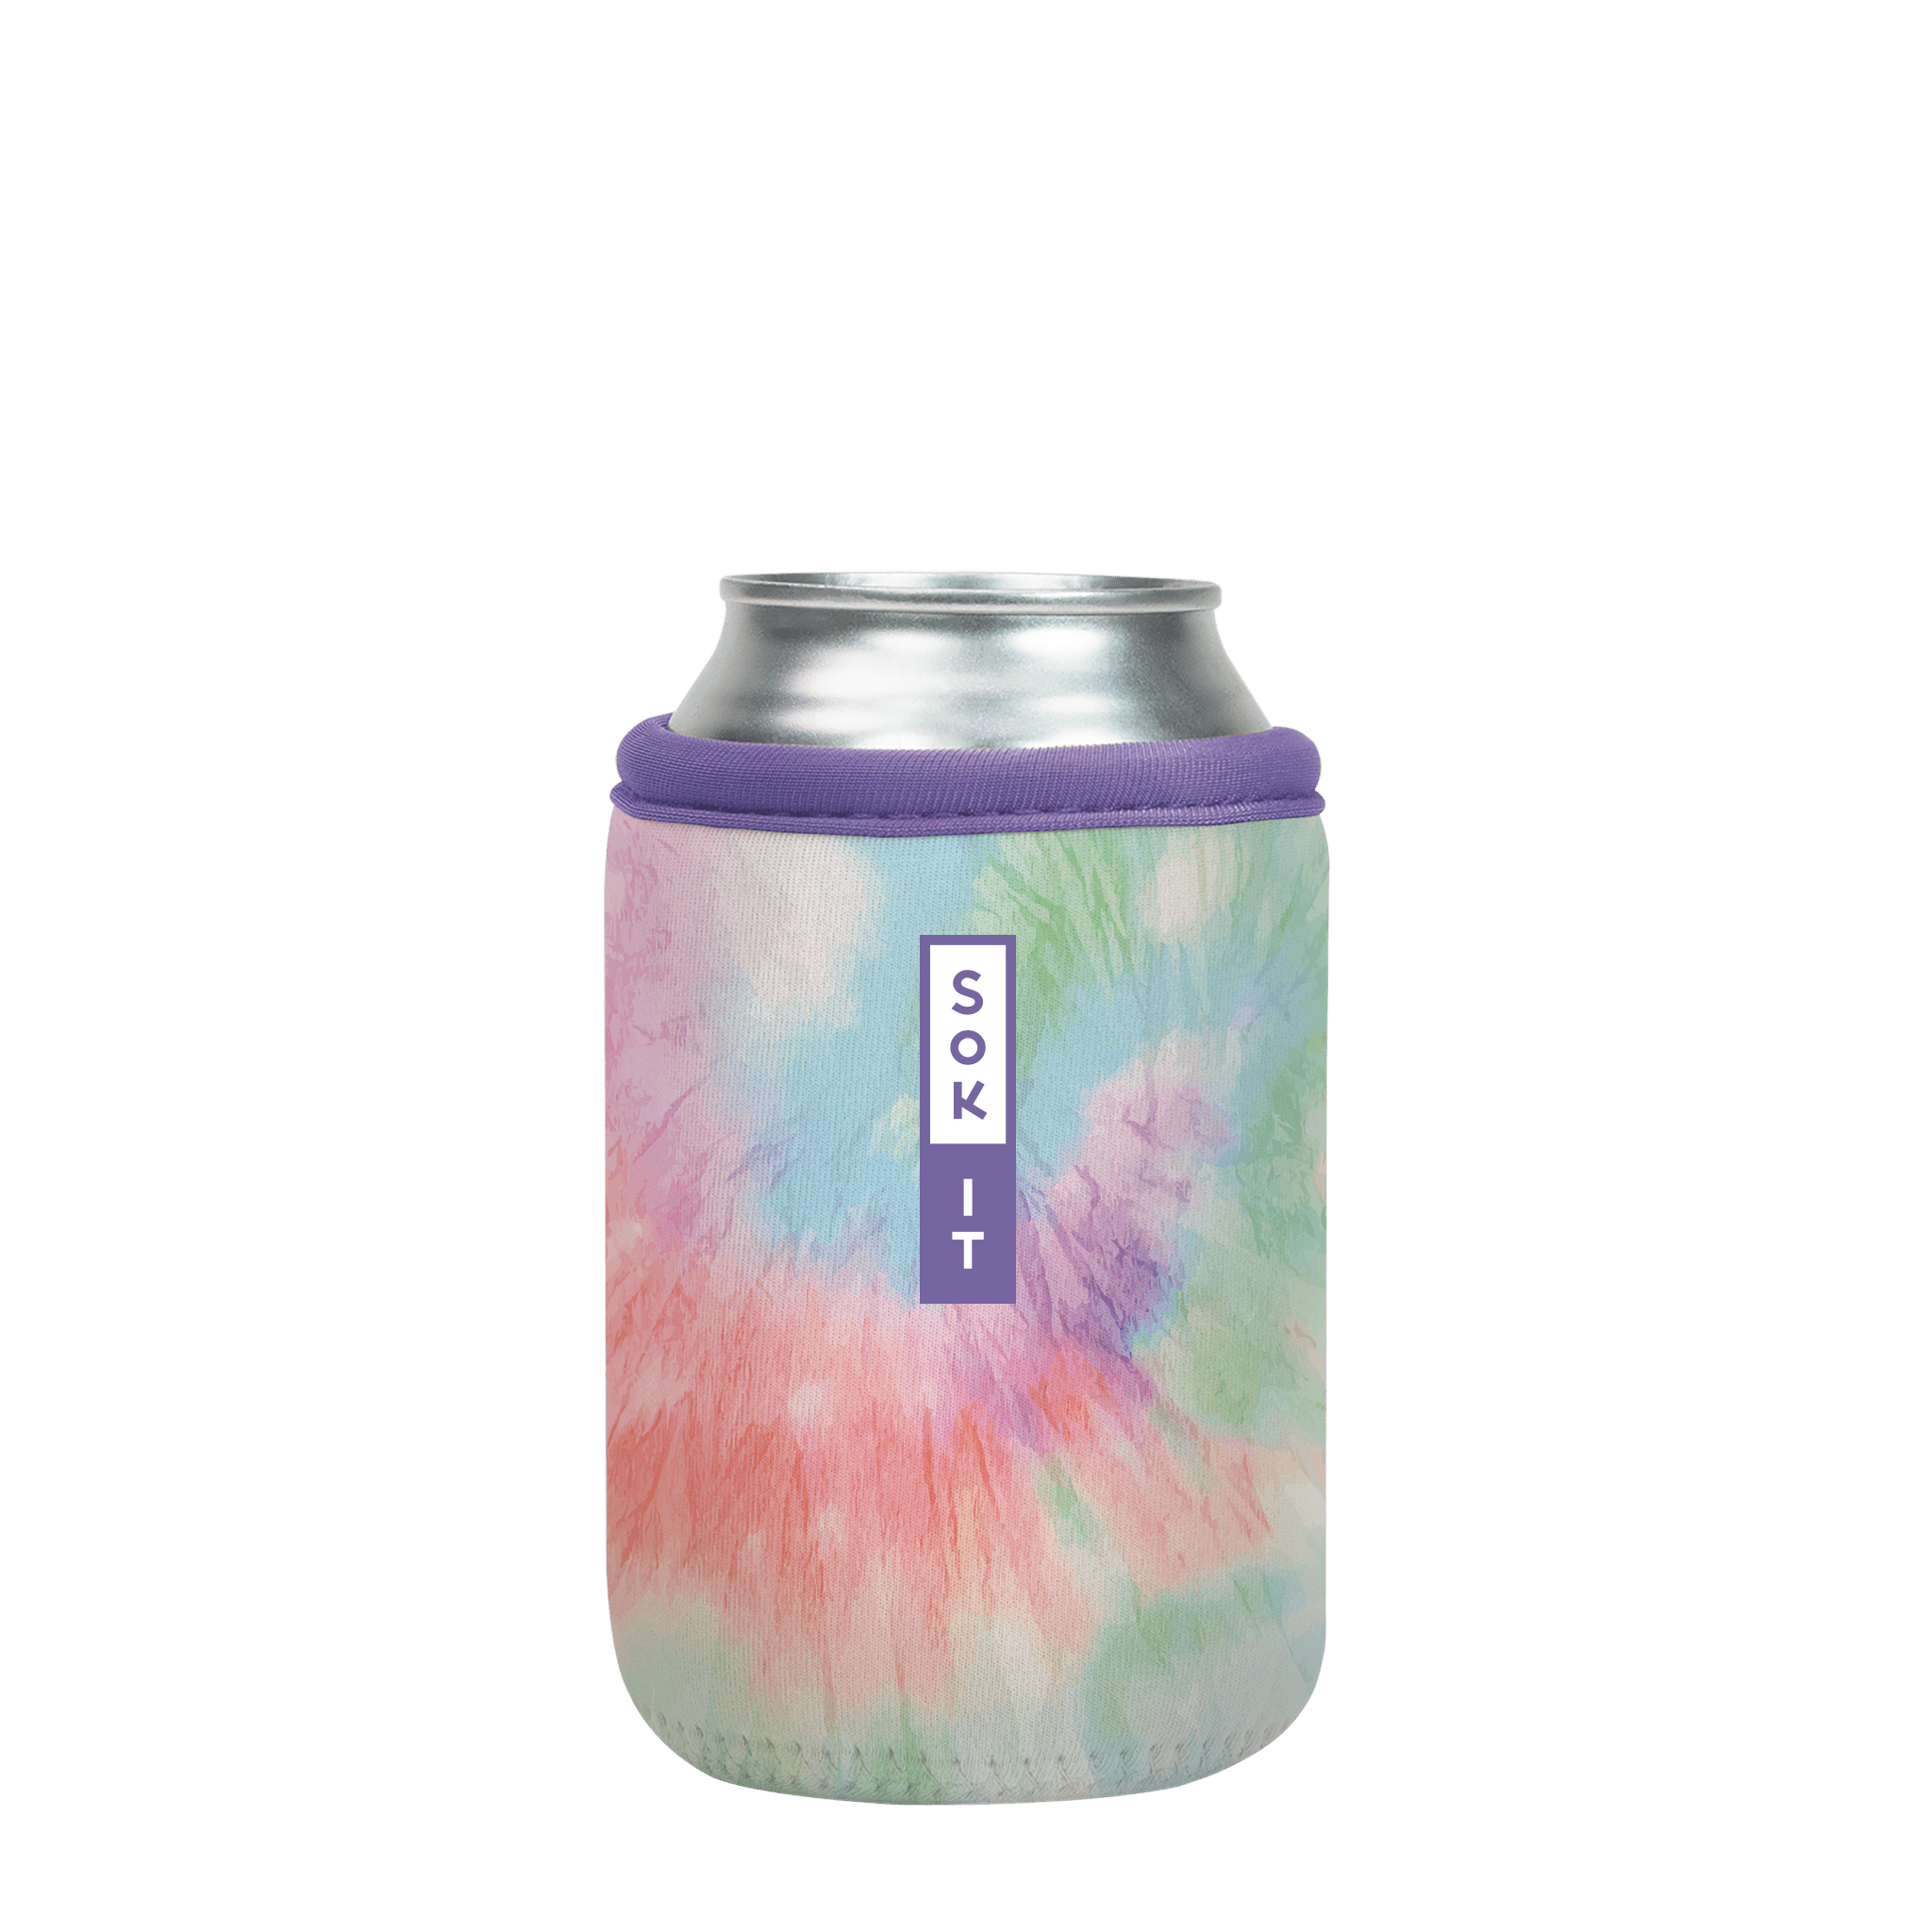 CanSok Daydreaming 12oz Can